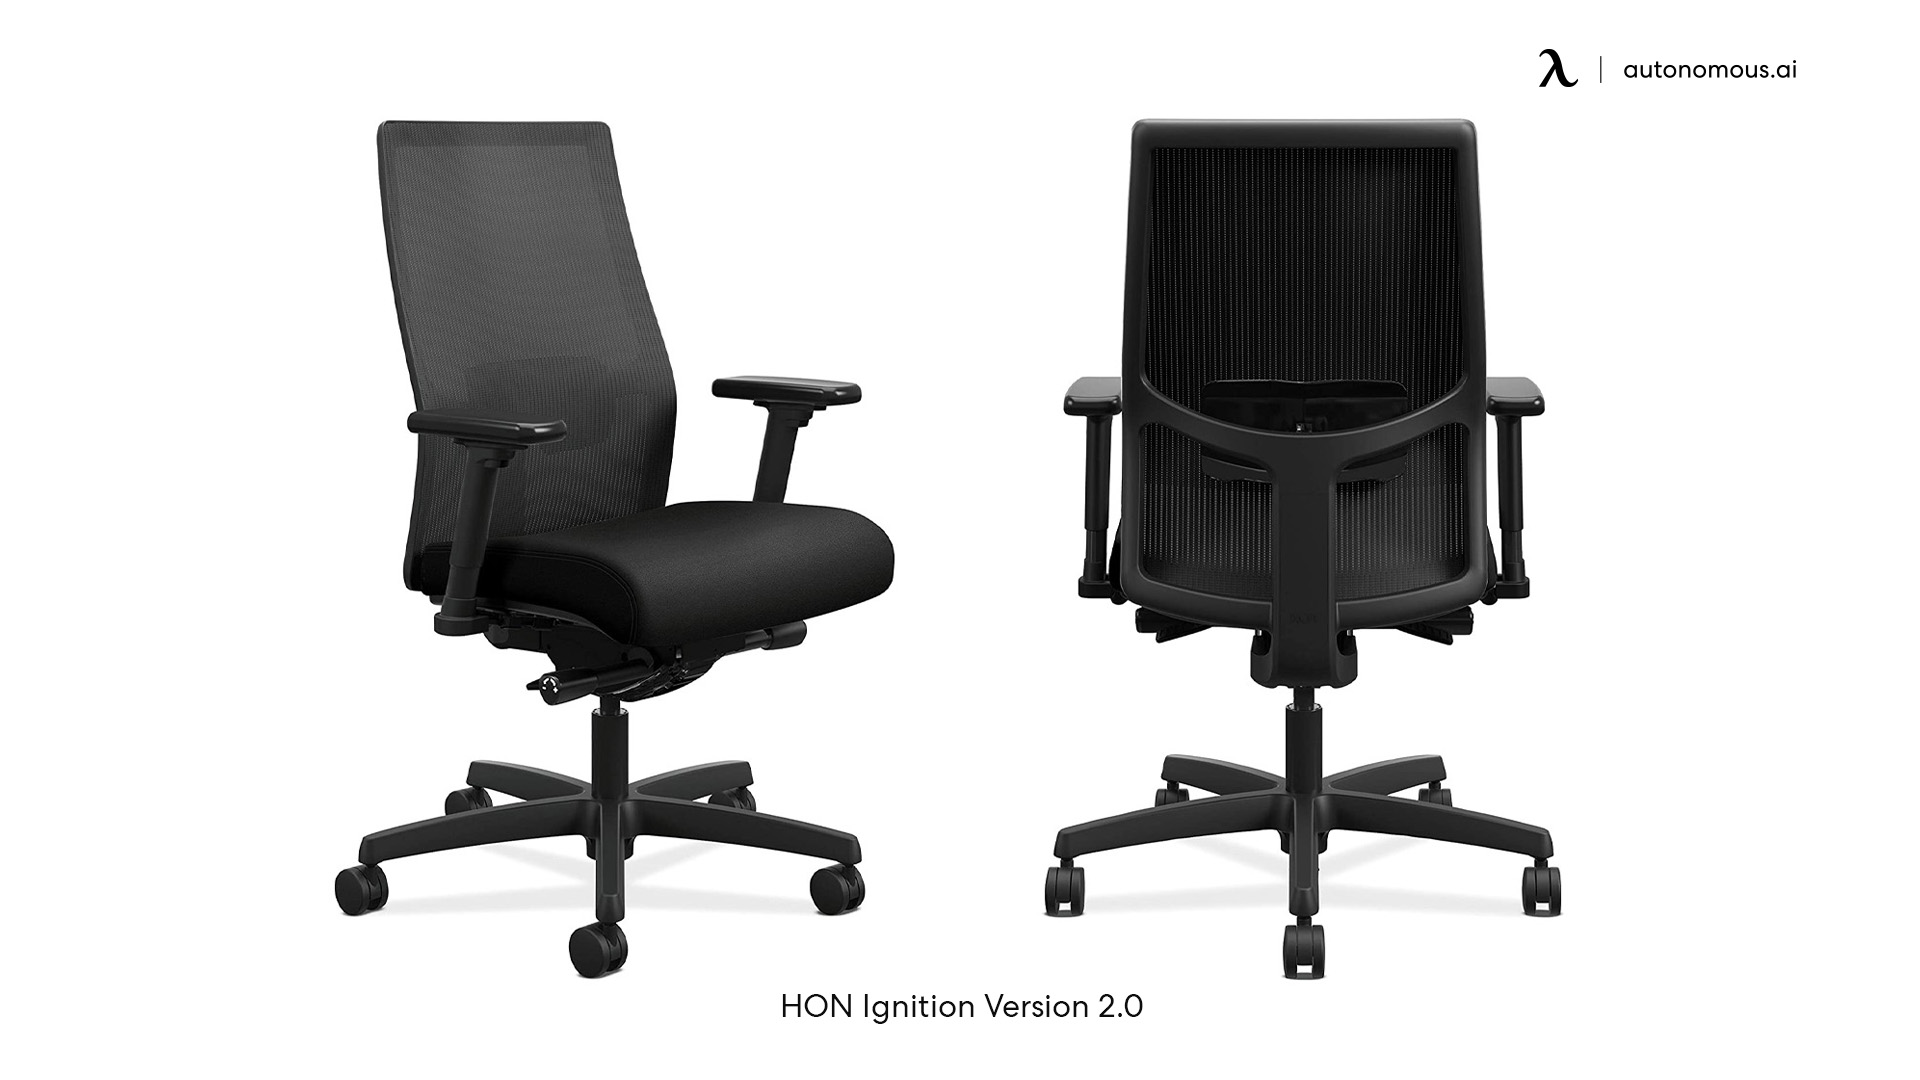 The HON Ignition 2.0 stylish home office chair